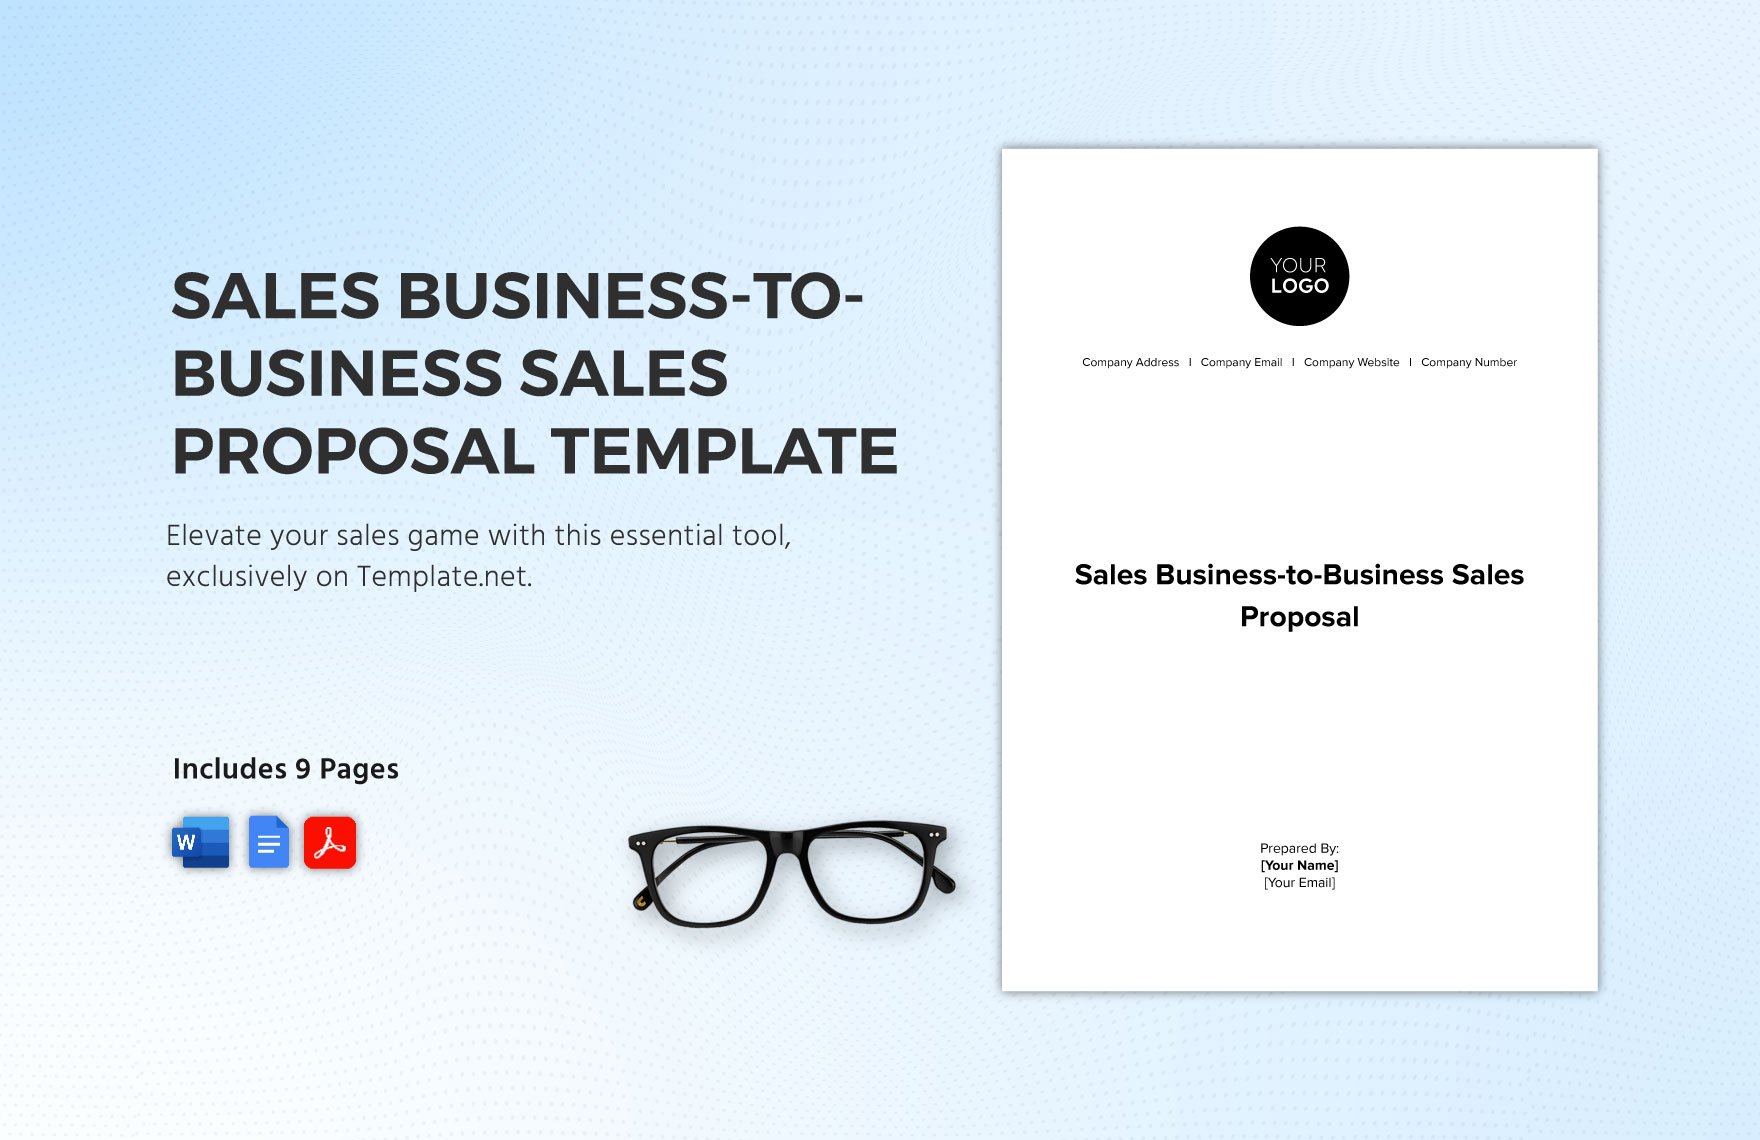 Sales Business-to-Business Sales Proposal Template